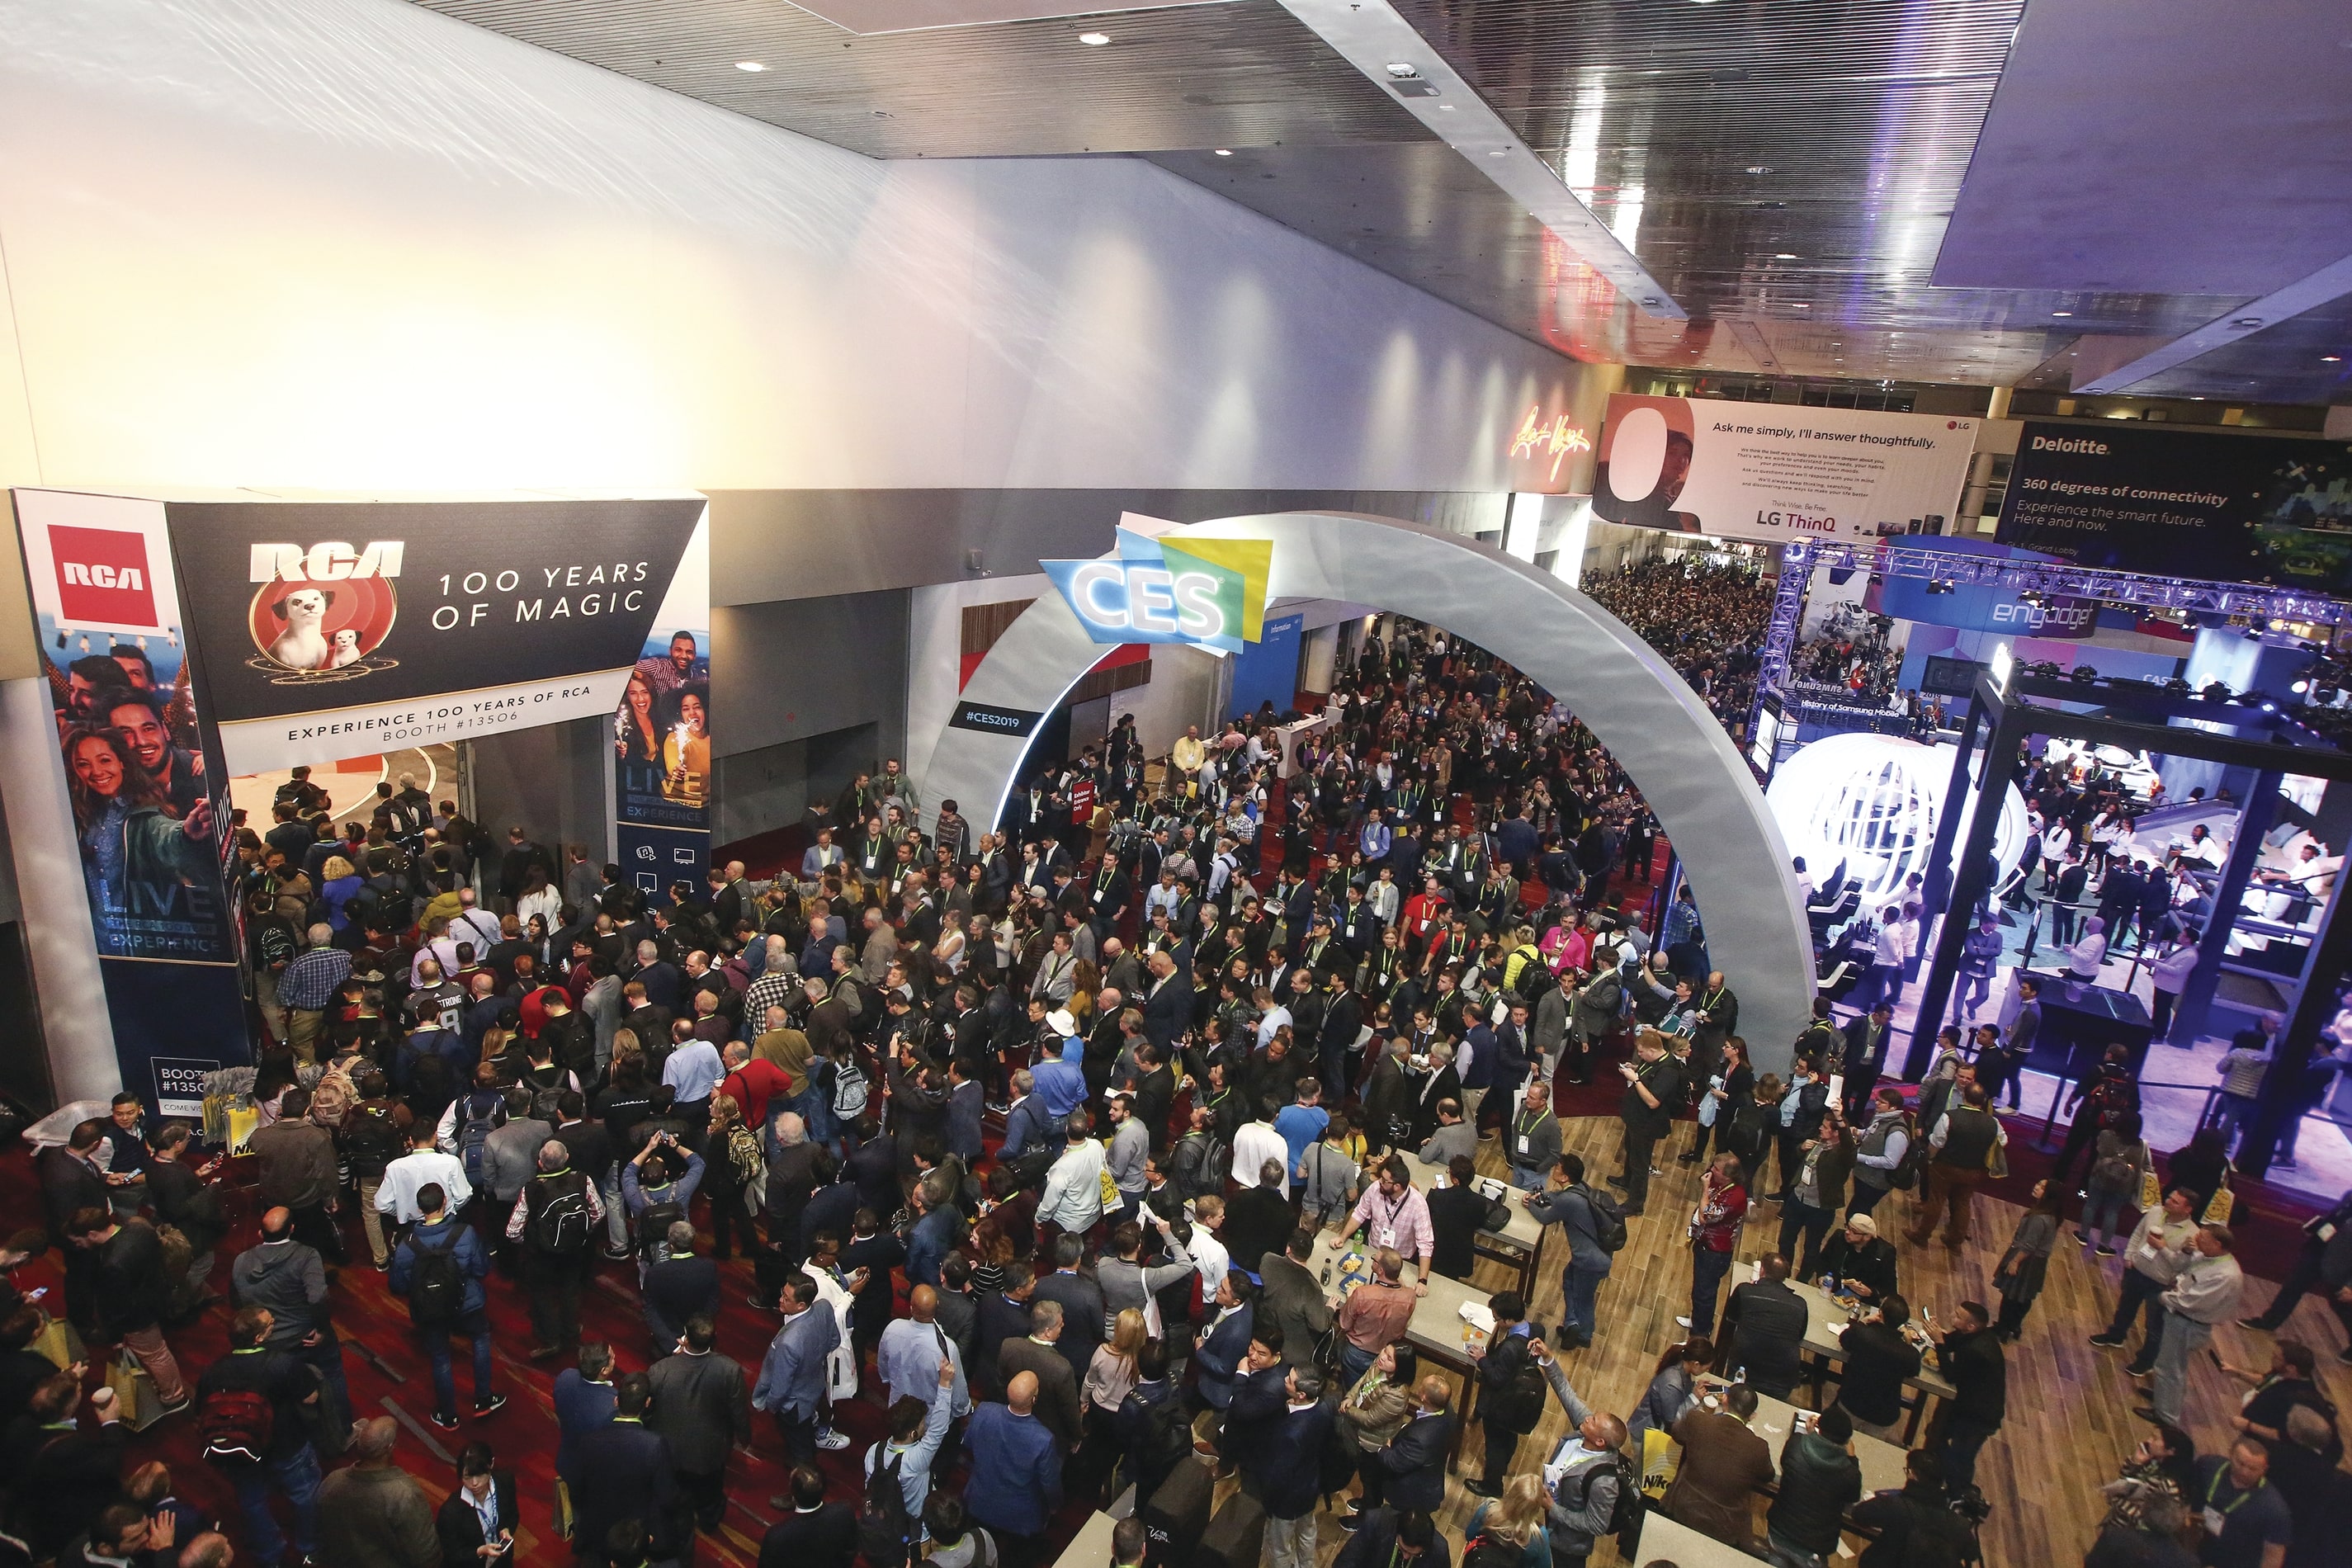 ces2019_crowd_opening.jpg